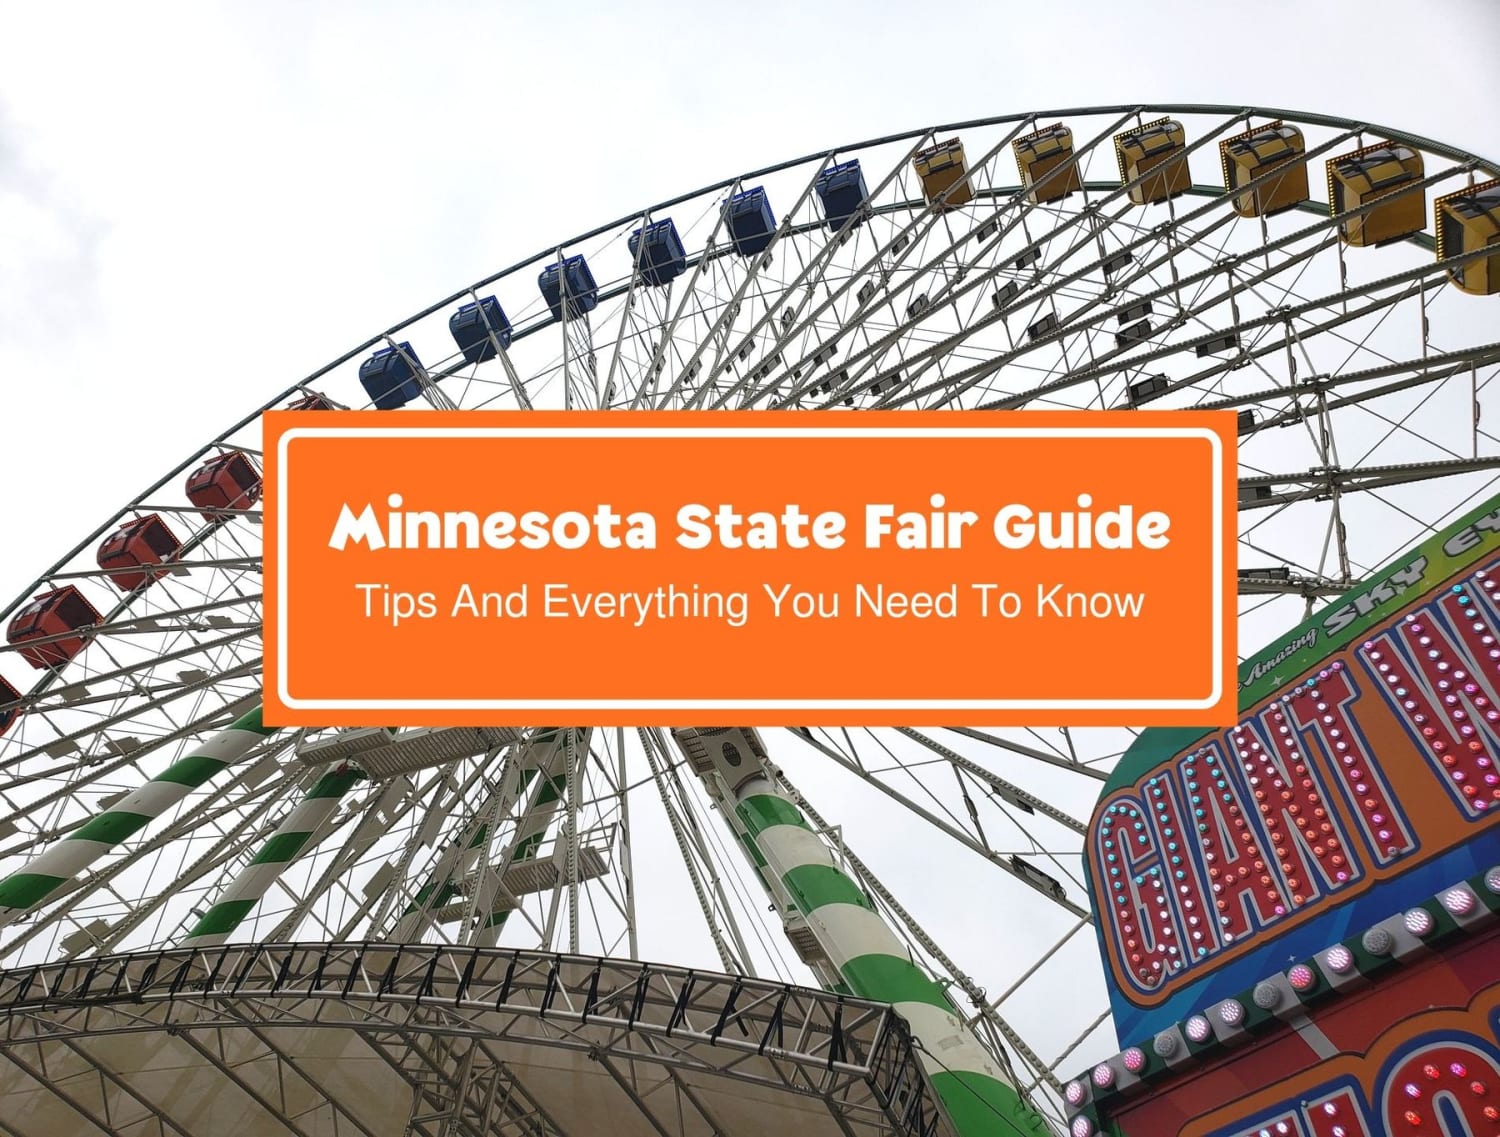 Minnesota State Fair Guide: Tips And Everything You Need To Know!